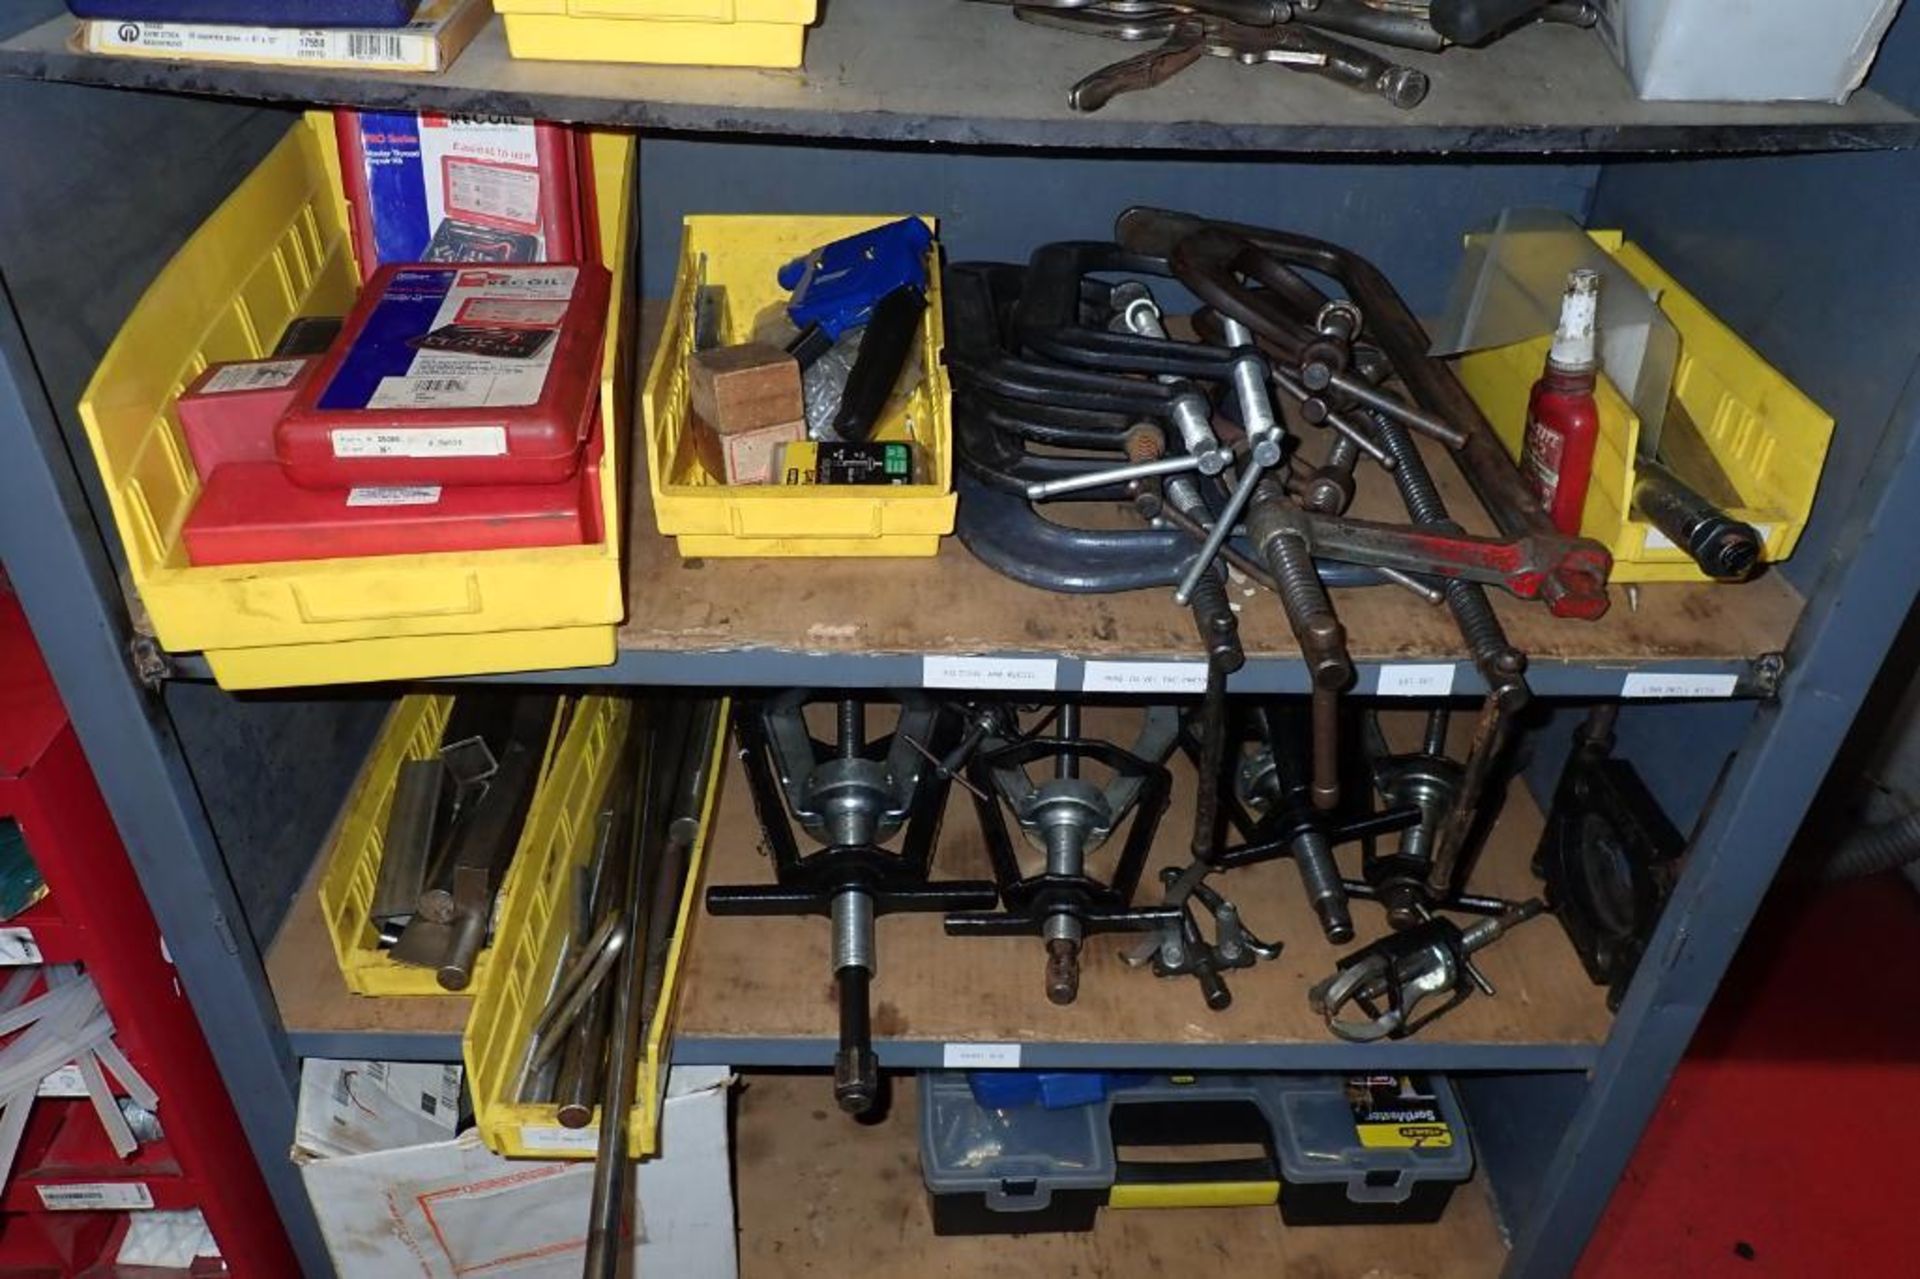 Contents of shelf, pulley pullers, C-clamps, shafts and dies - ** Rigging Fee: $ 100 ** - Image 3 of 7